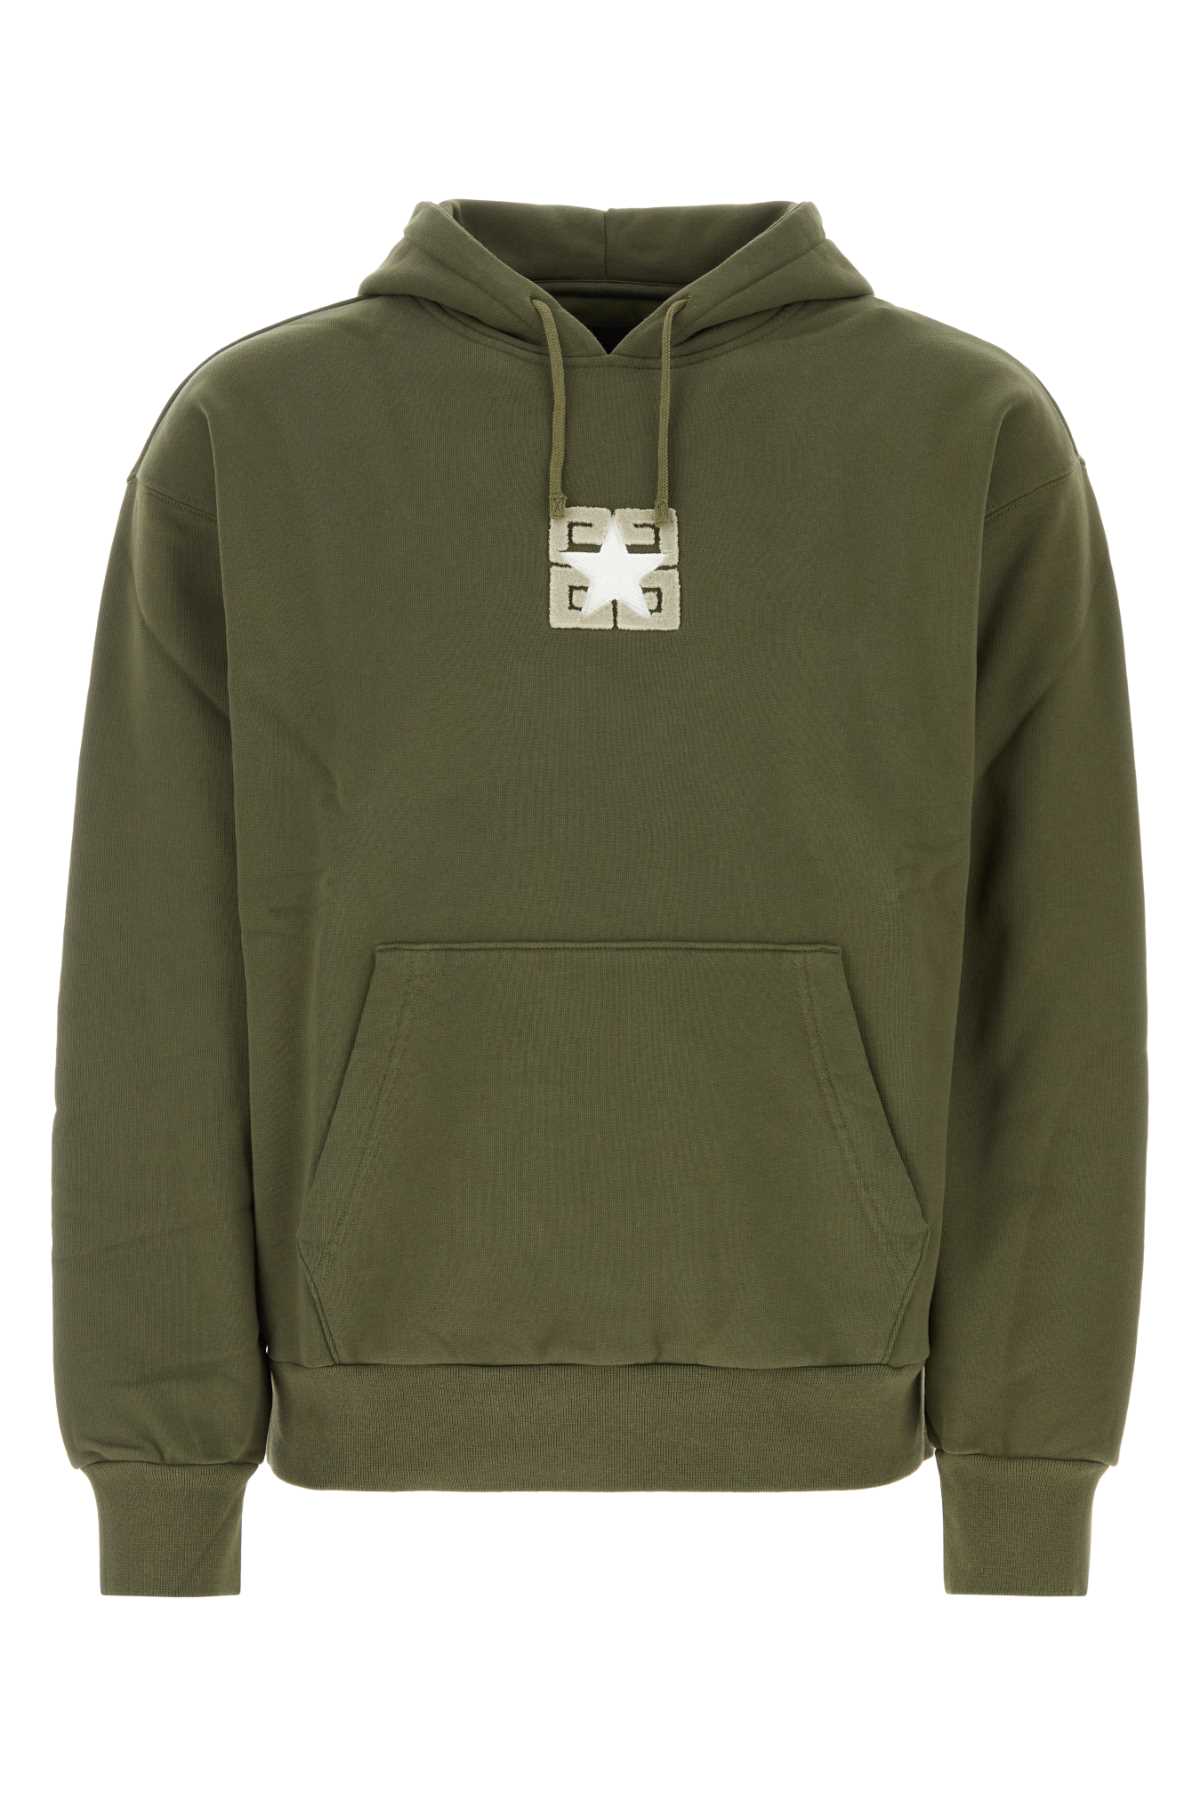 Givenchy Army Green Cotton Sweatshirt In Olive Green